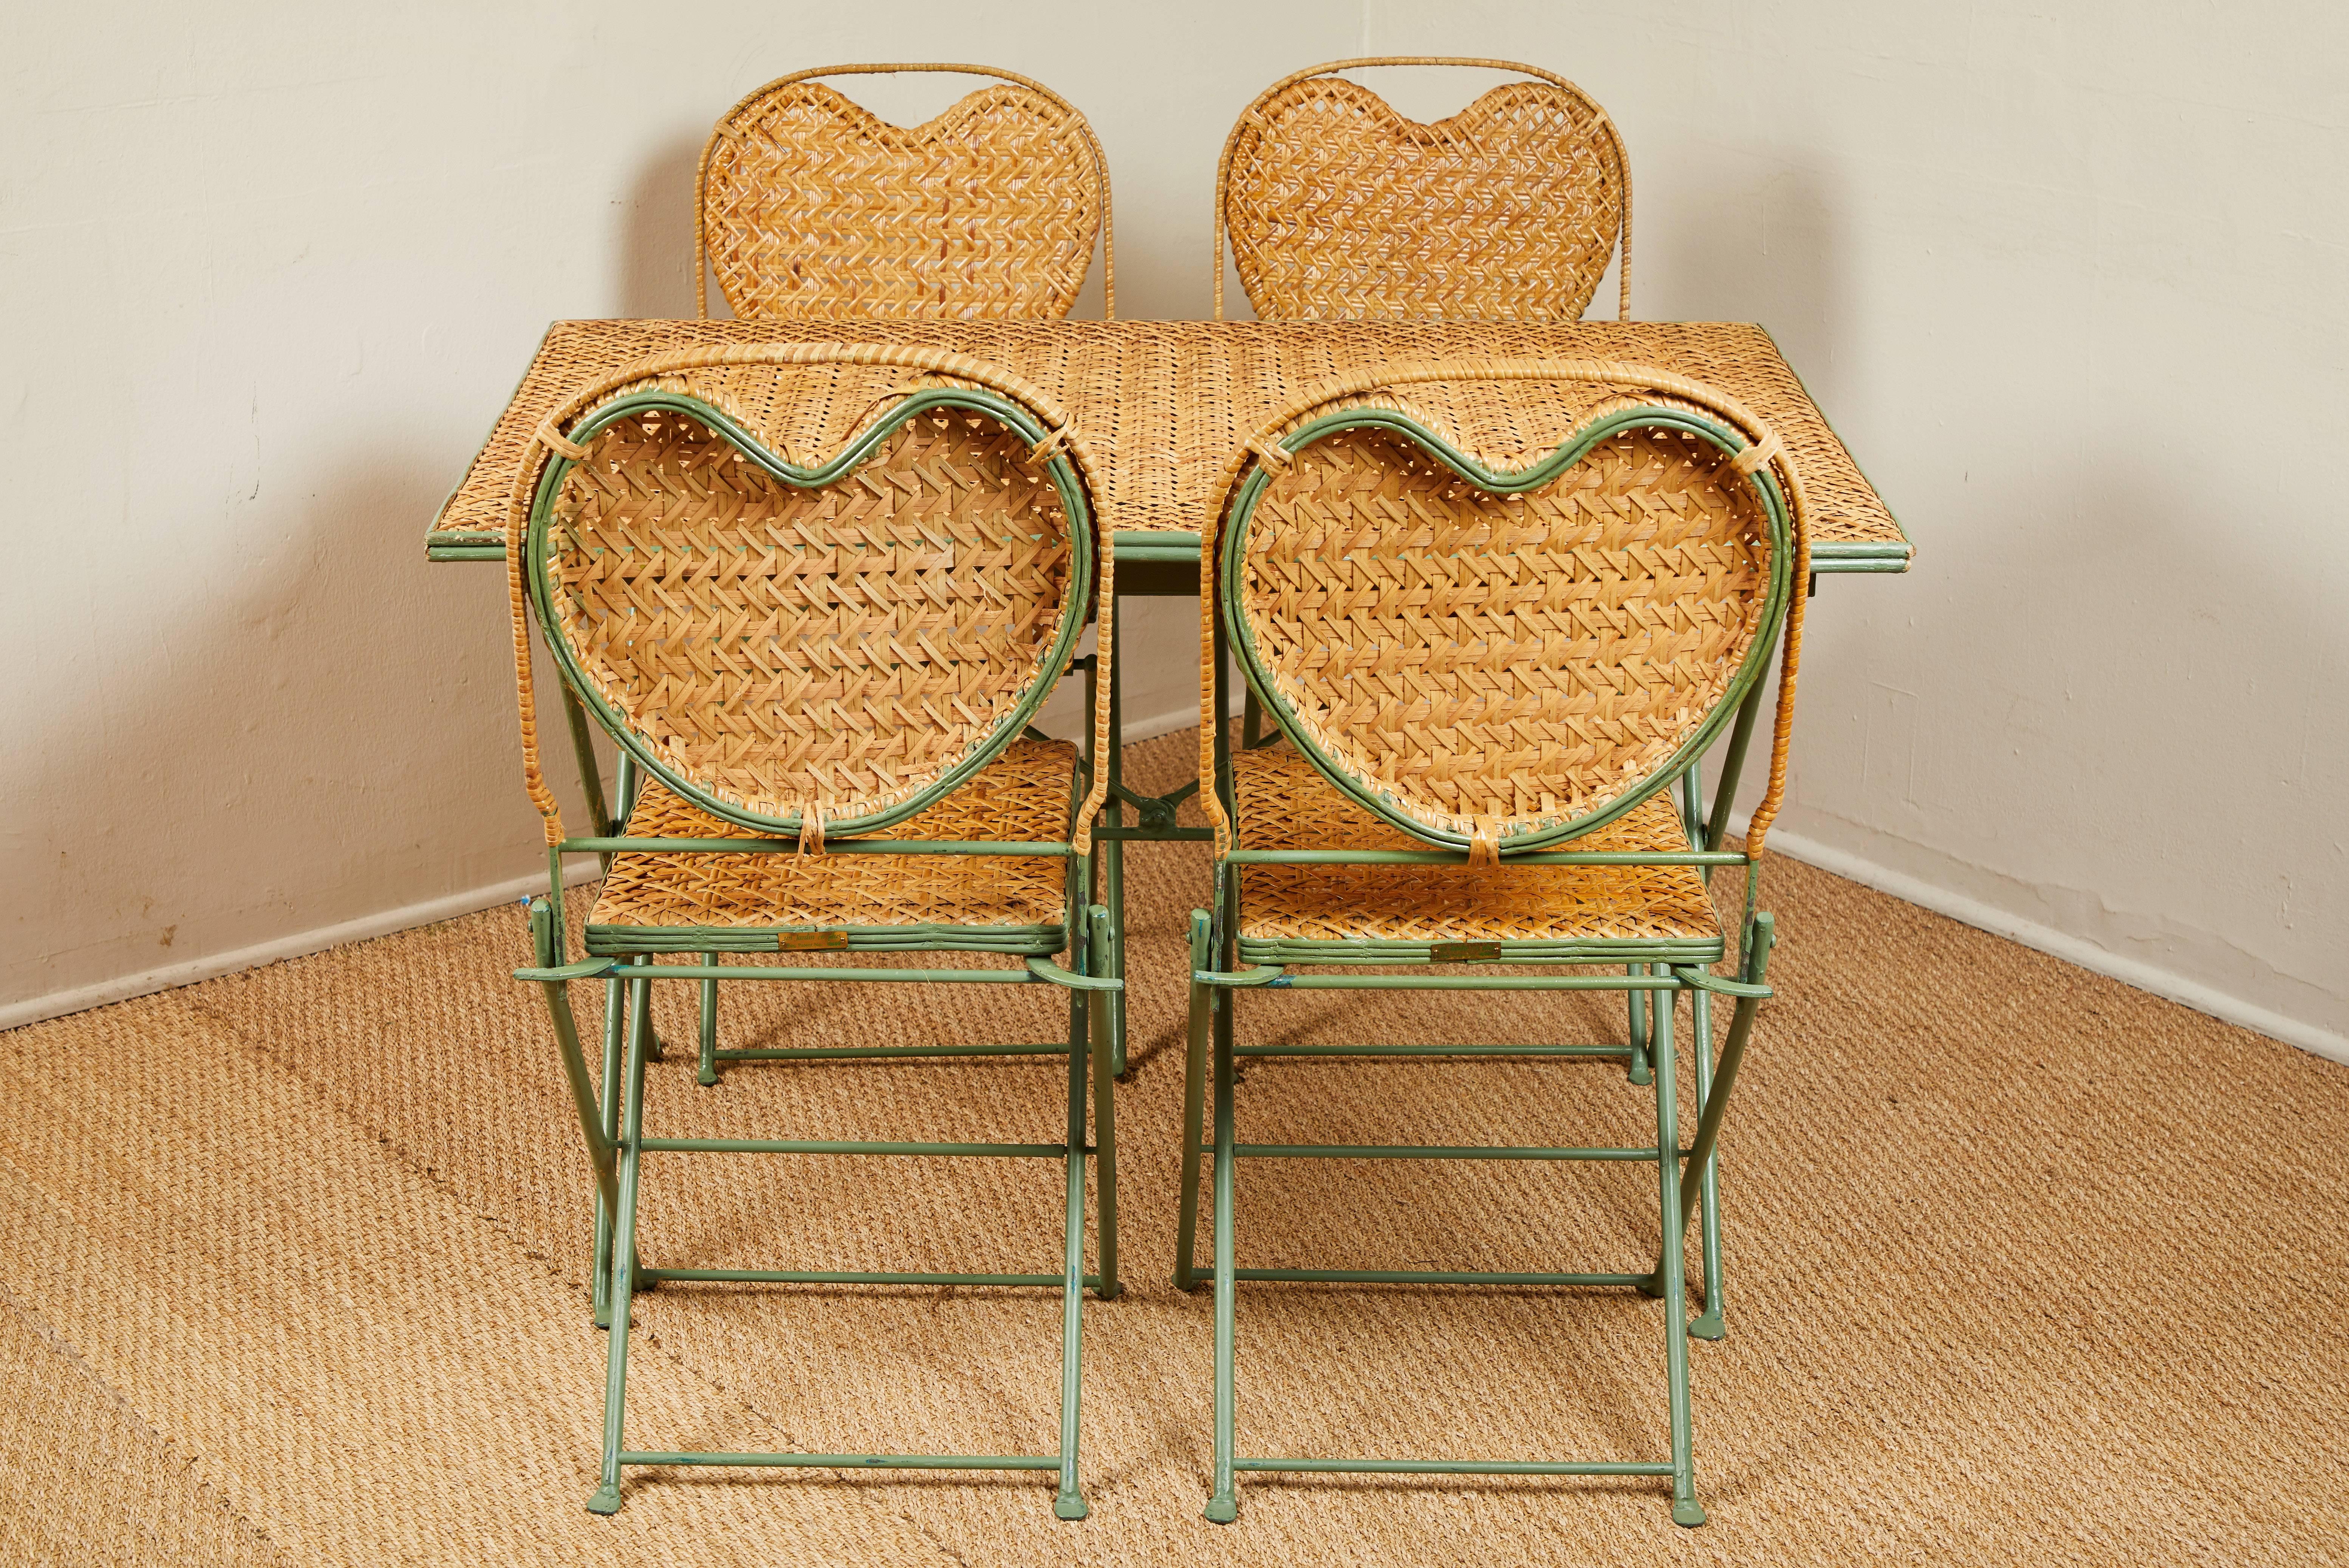 Patented folding table and chair set made in USA by Un Jardin en Plus. See image 12 for metal tag. Heart shaped caned backs on the chairs. Slightly distressed turquoise blue painted metal.
 